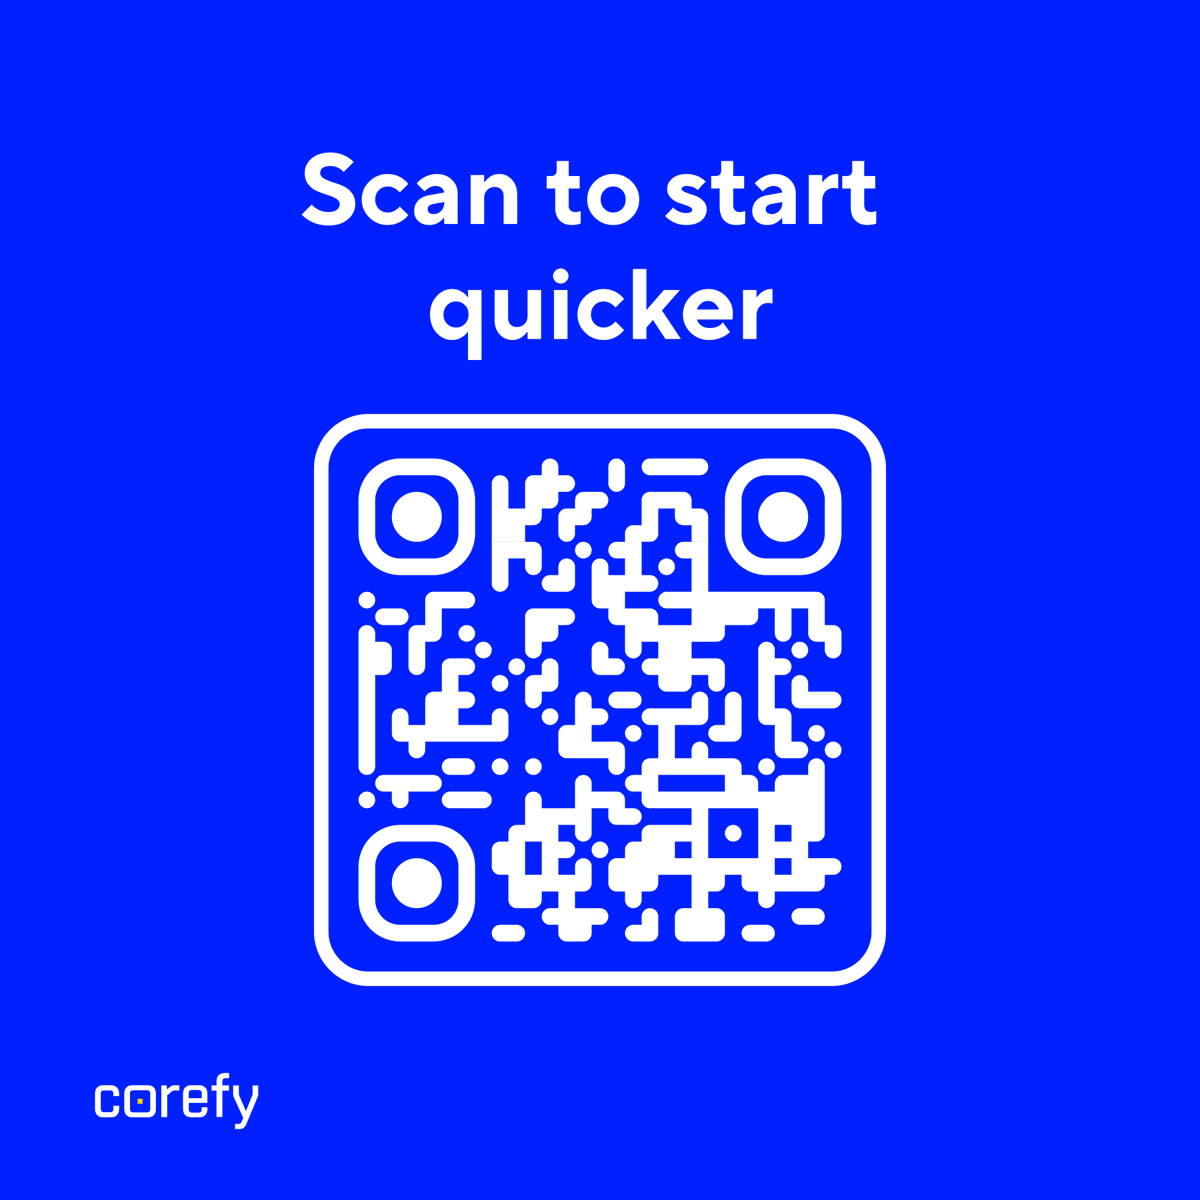 Looking to launch your merchant services business?

Discover the first steps to take before you start developing your solution.

Or scan the QR code on the last slide and start faster with a ready-made white-label solution 😎

#paymentorchestration #merchantservices #isomsp